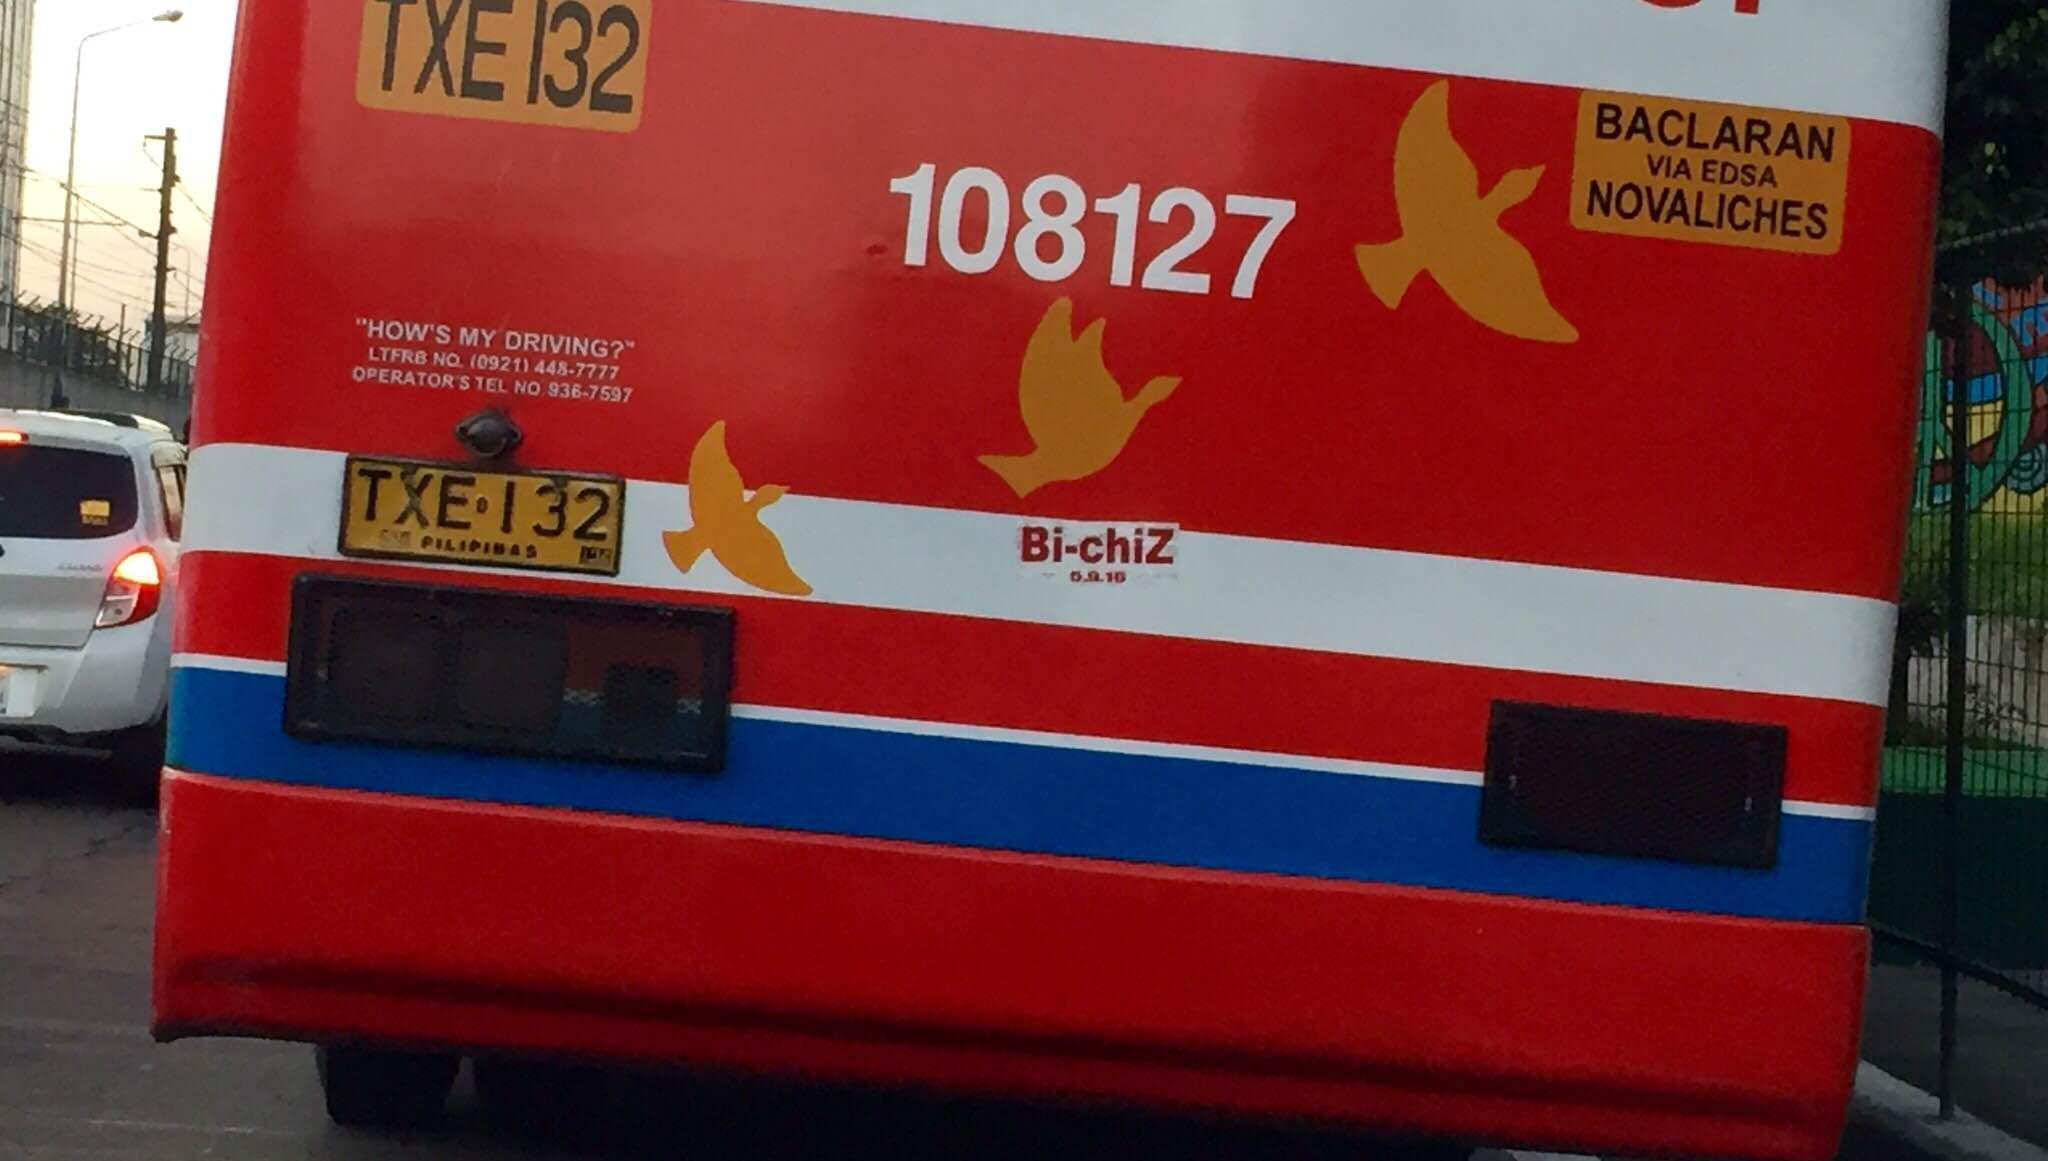 Binay-Chiz for 2016? This campaign sticker says so